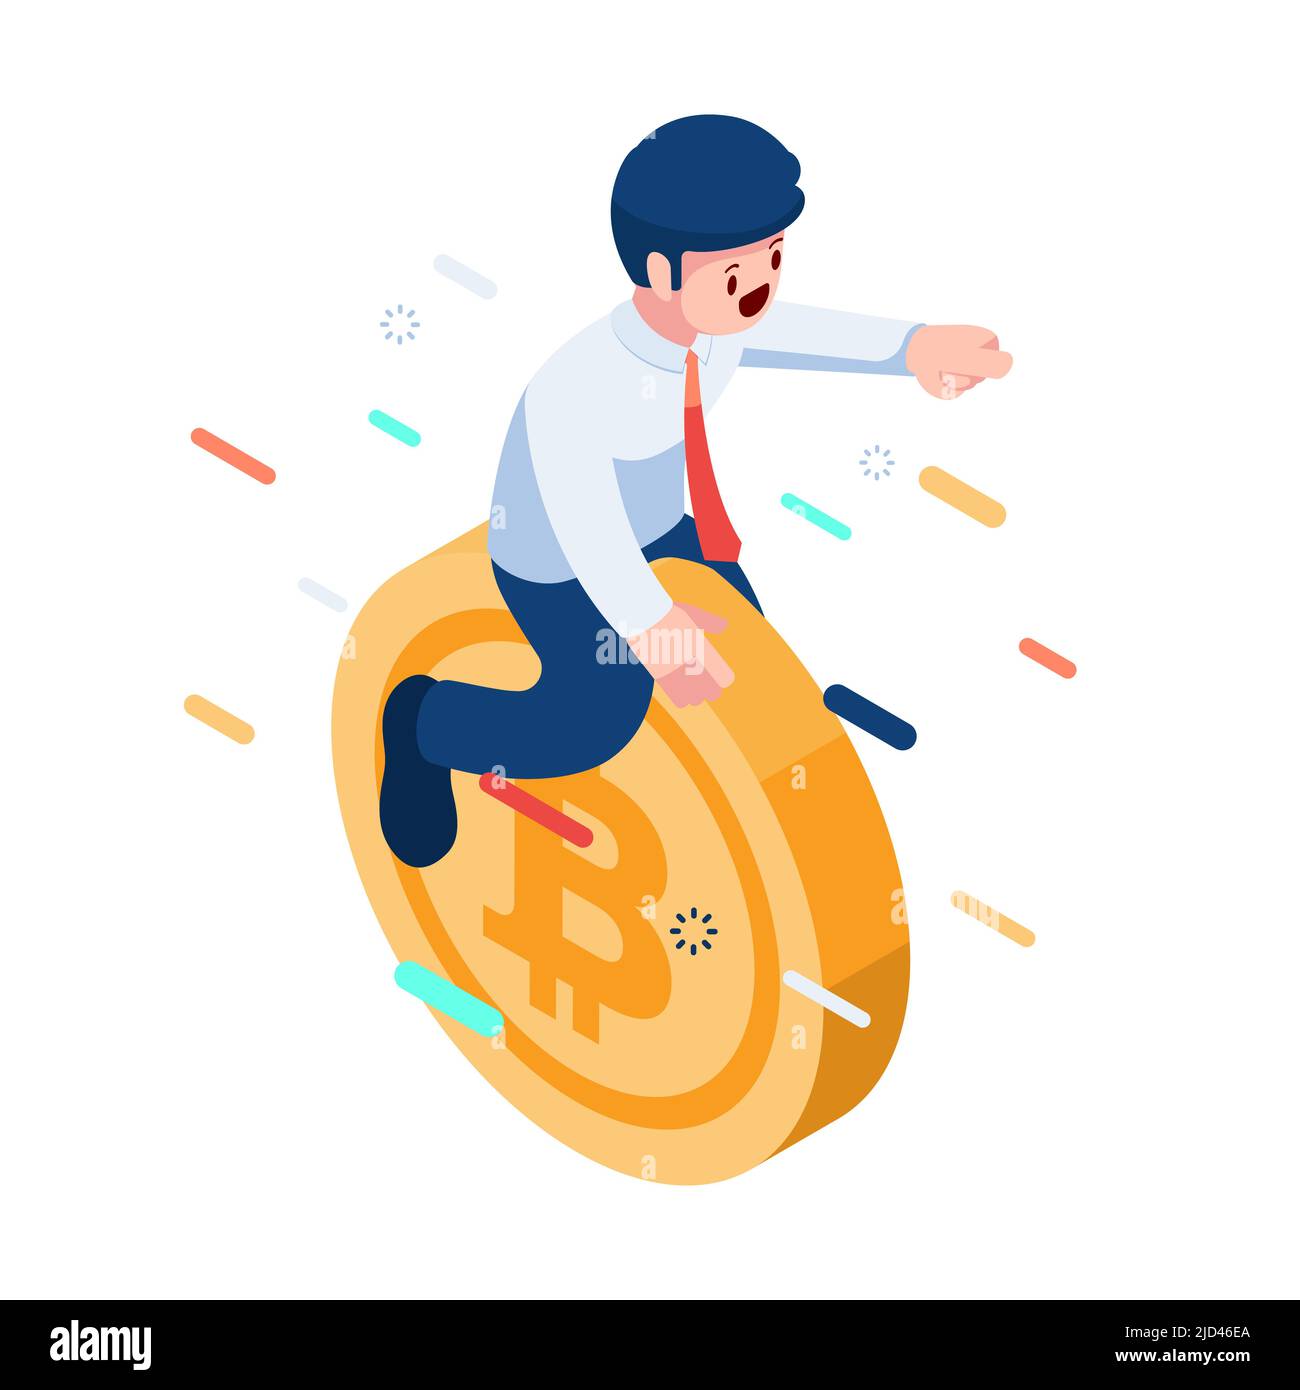 Flat 3d Isometric Businessman Riding Flying Bitcoin. Bitcoin and Cryptocurrency Concept. Stock Vector